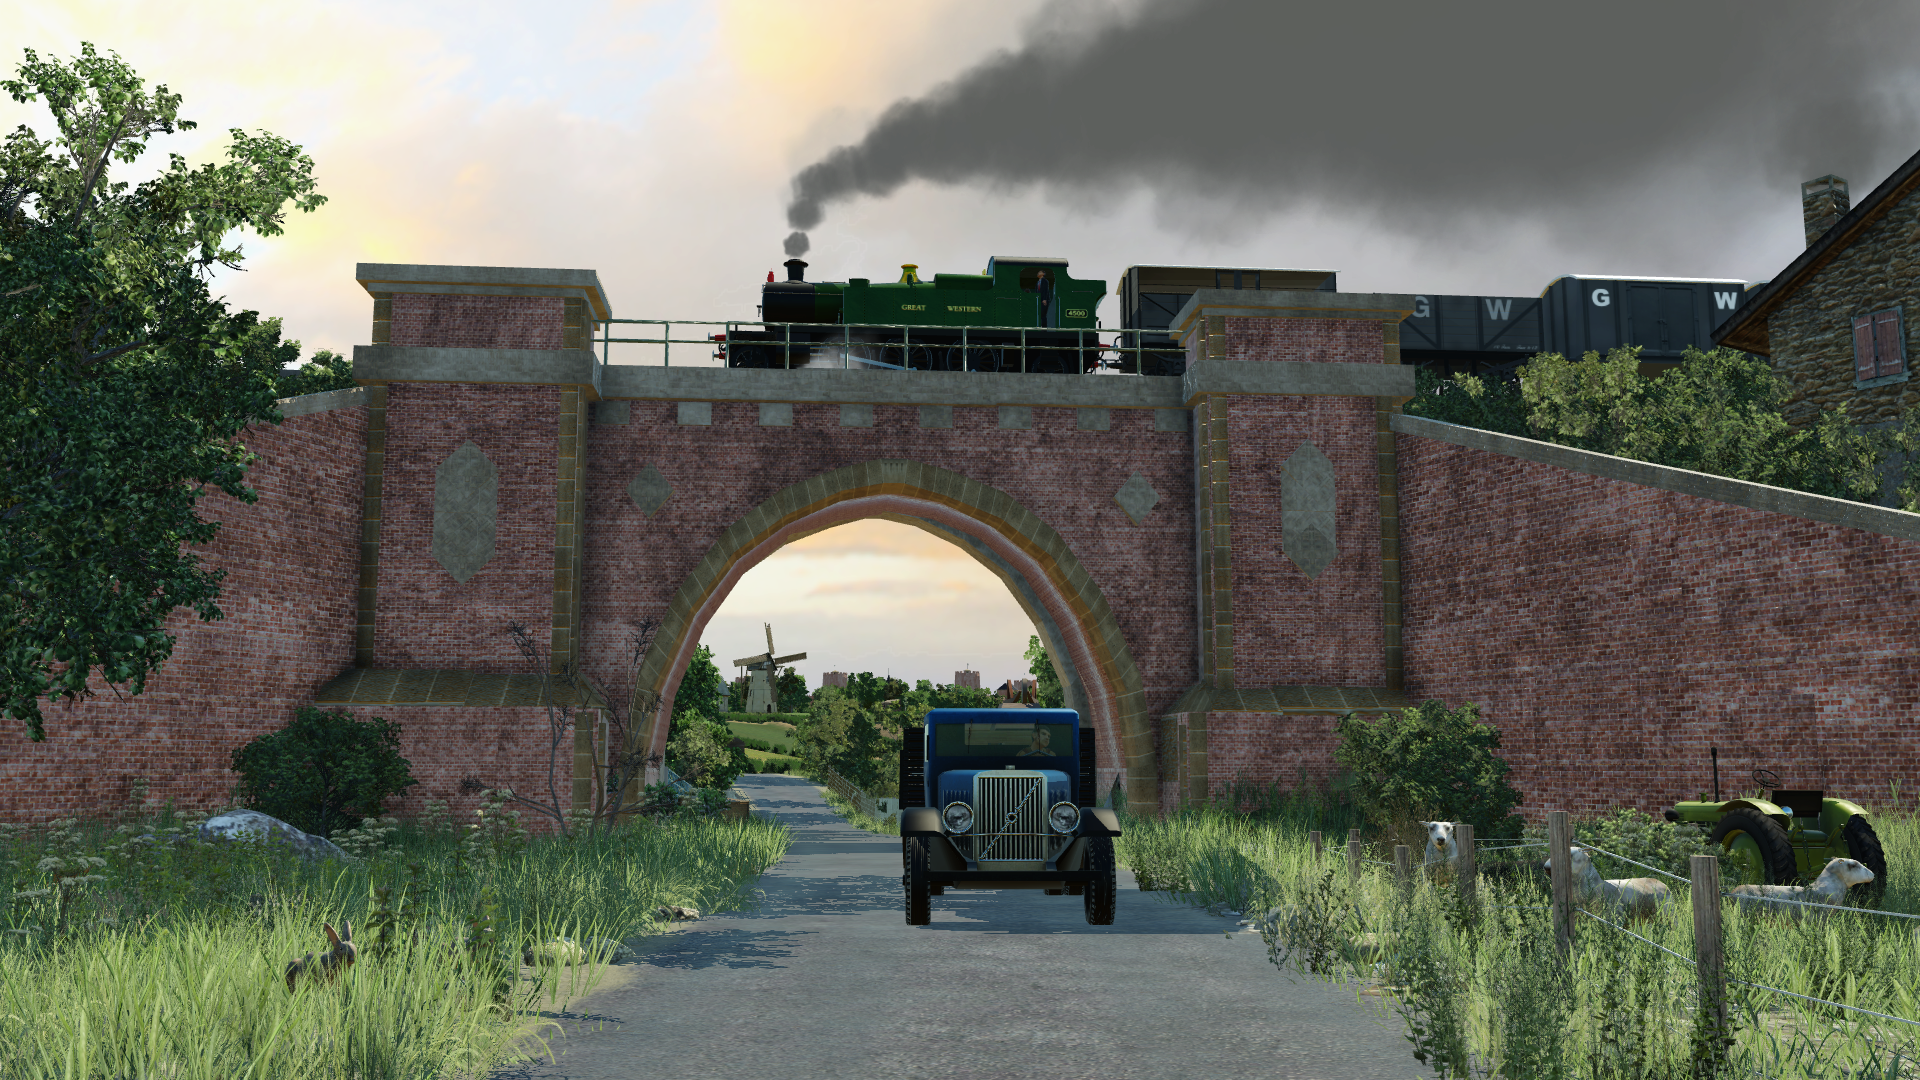 [TpF1] Experimenting with bridge construction assets (2)